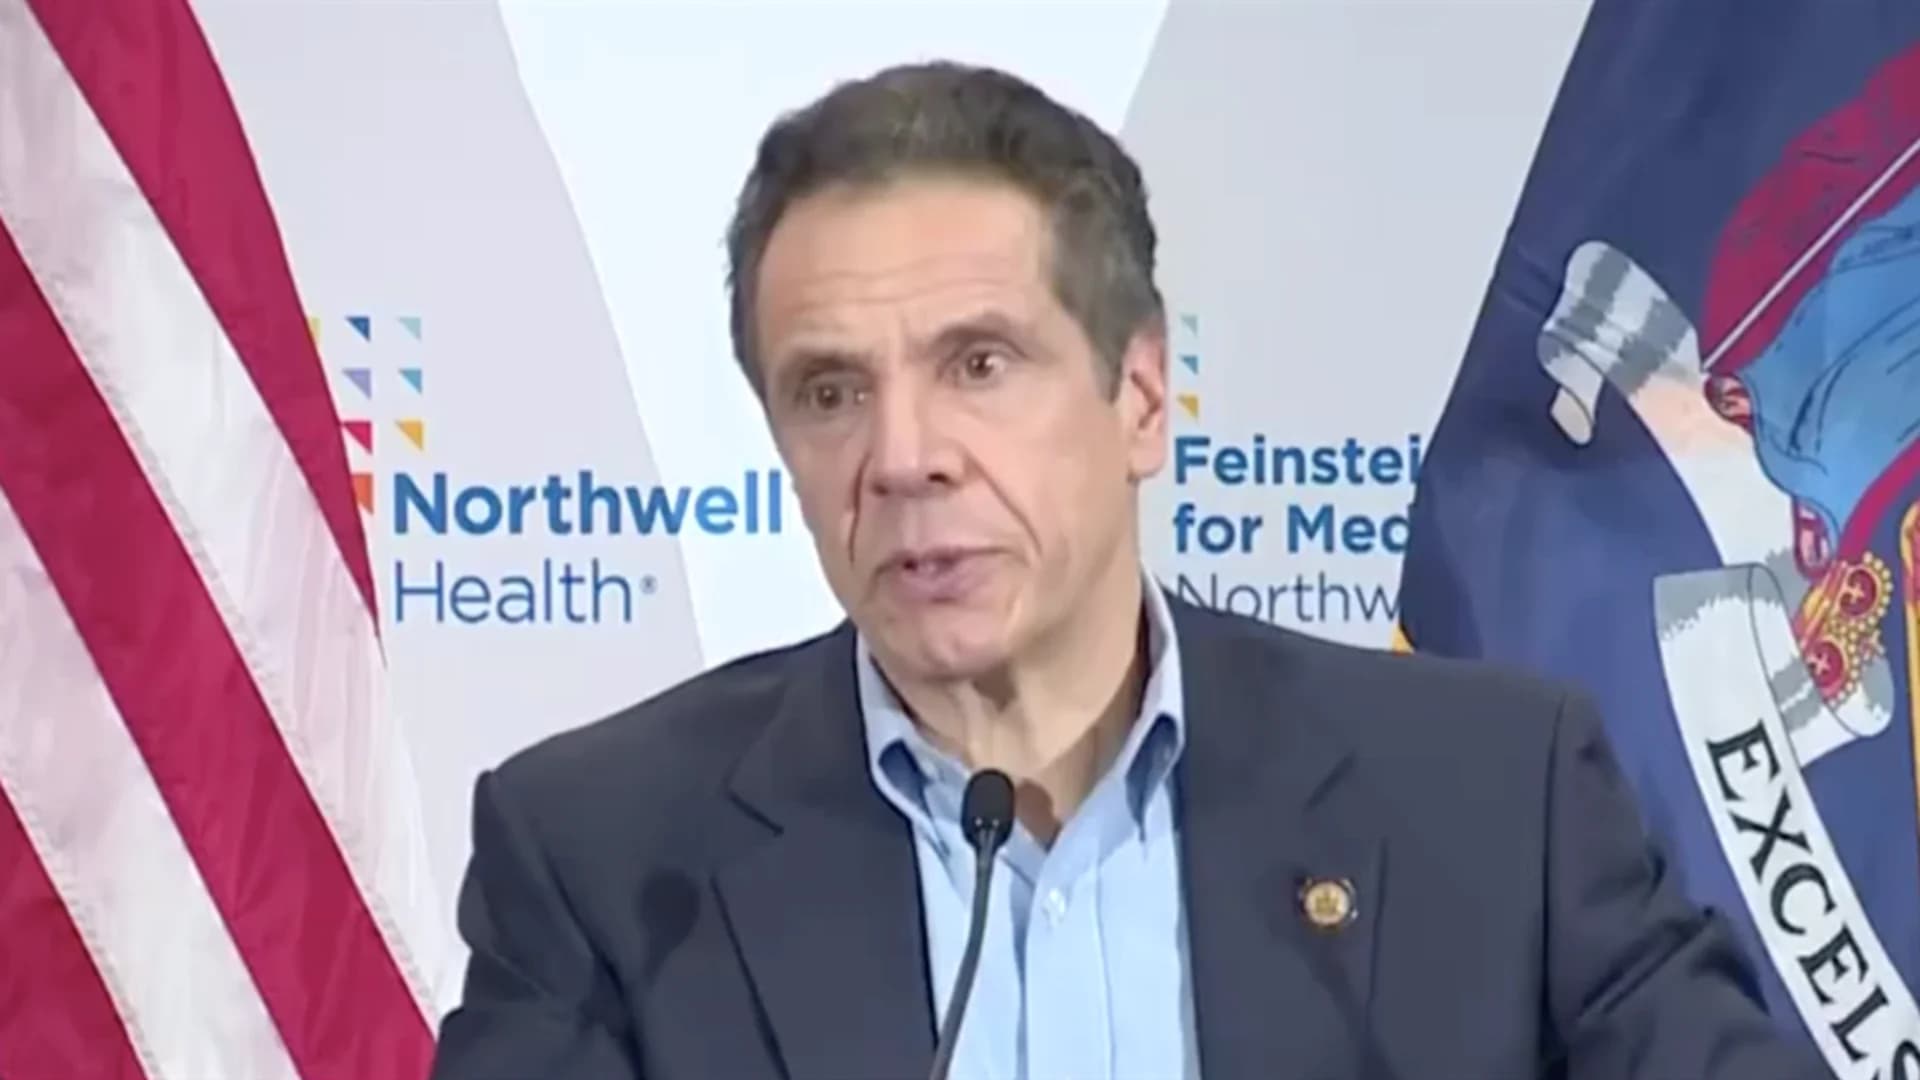 'It's only halftime.' Gov. Cuomo says COVID battle still very real, announces 'aggressive' antibody testing